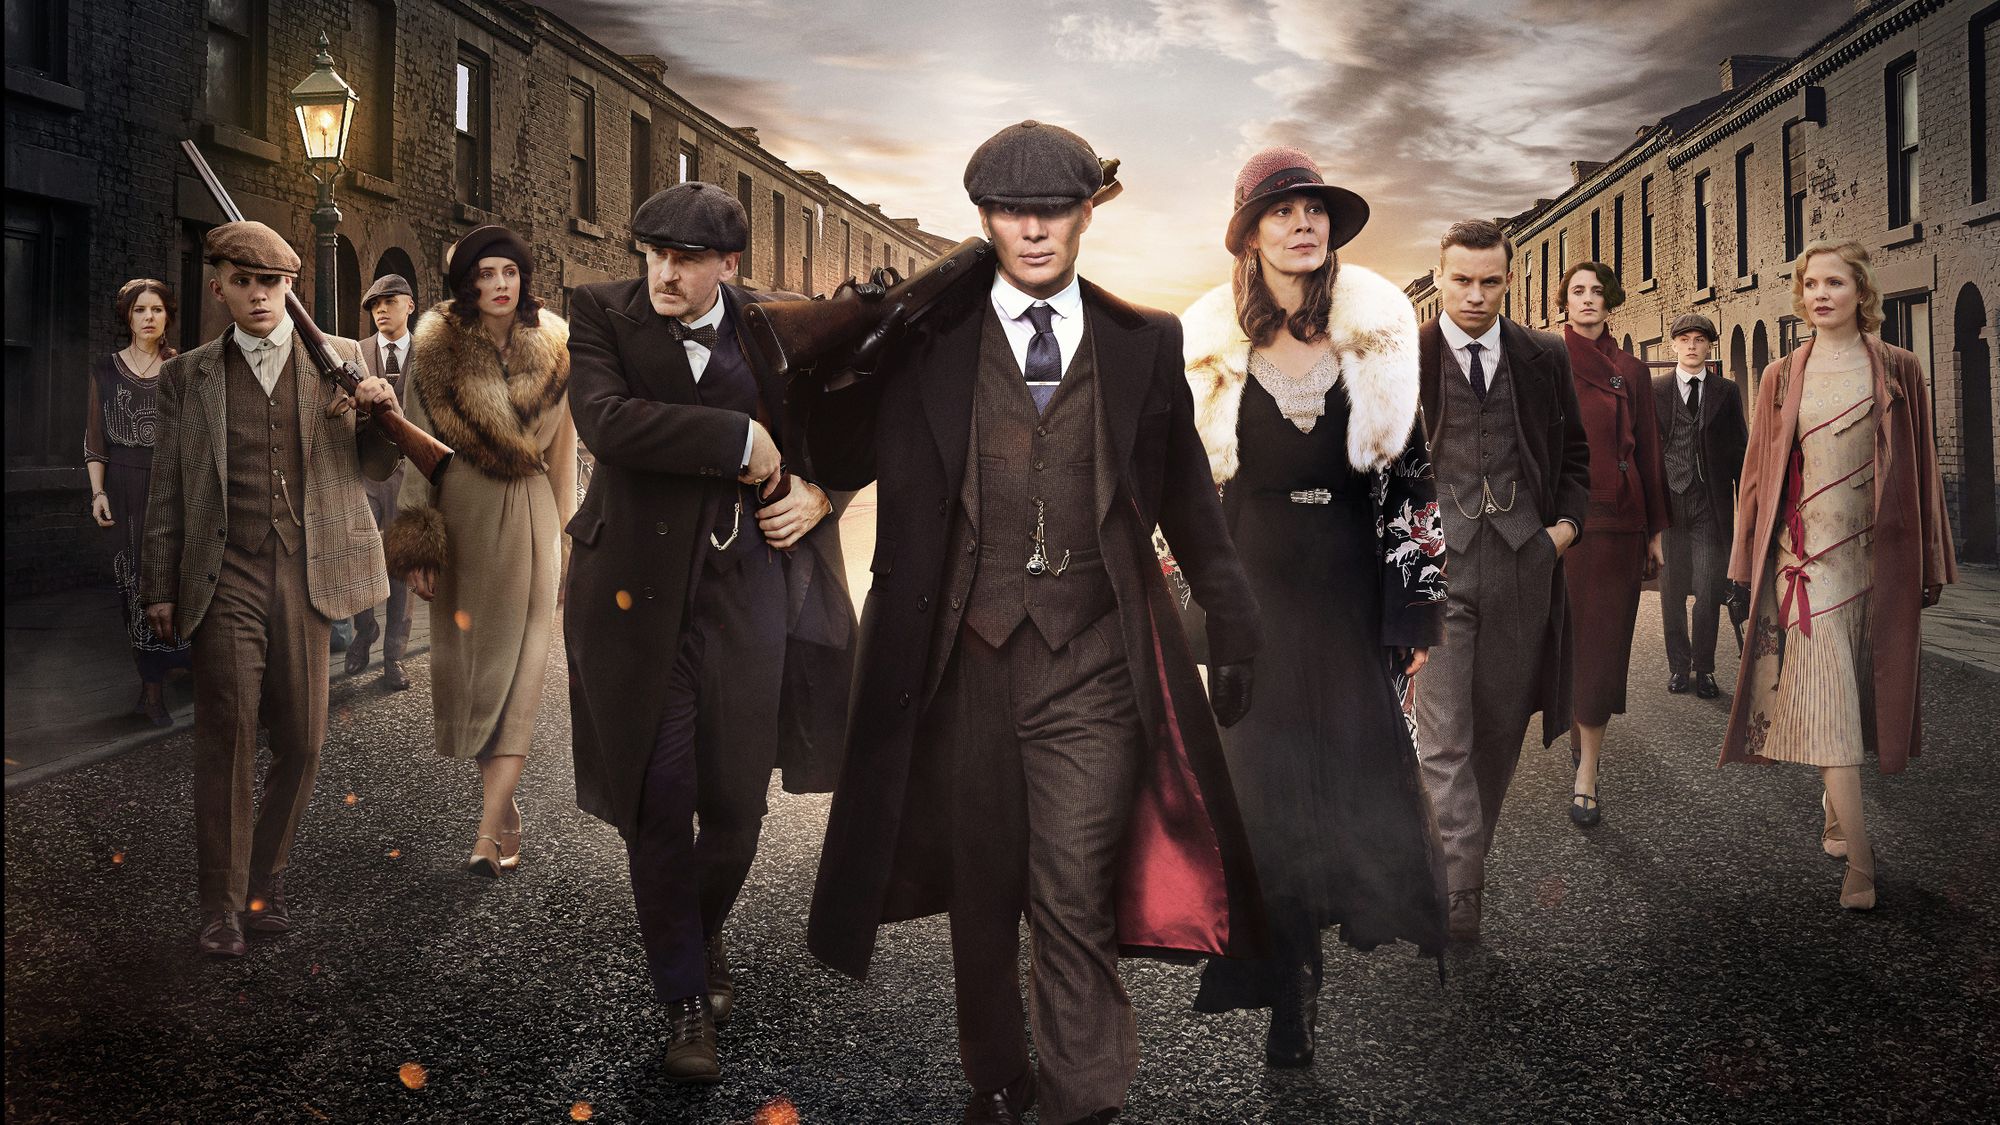 My Thoughts on Peaky Blinders Part 2: Bureaucracy and the Rise of Fascism